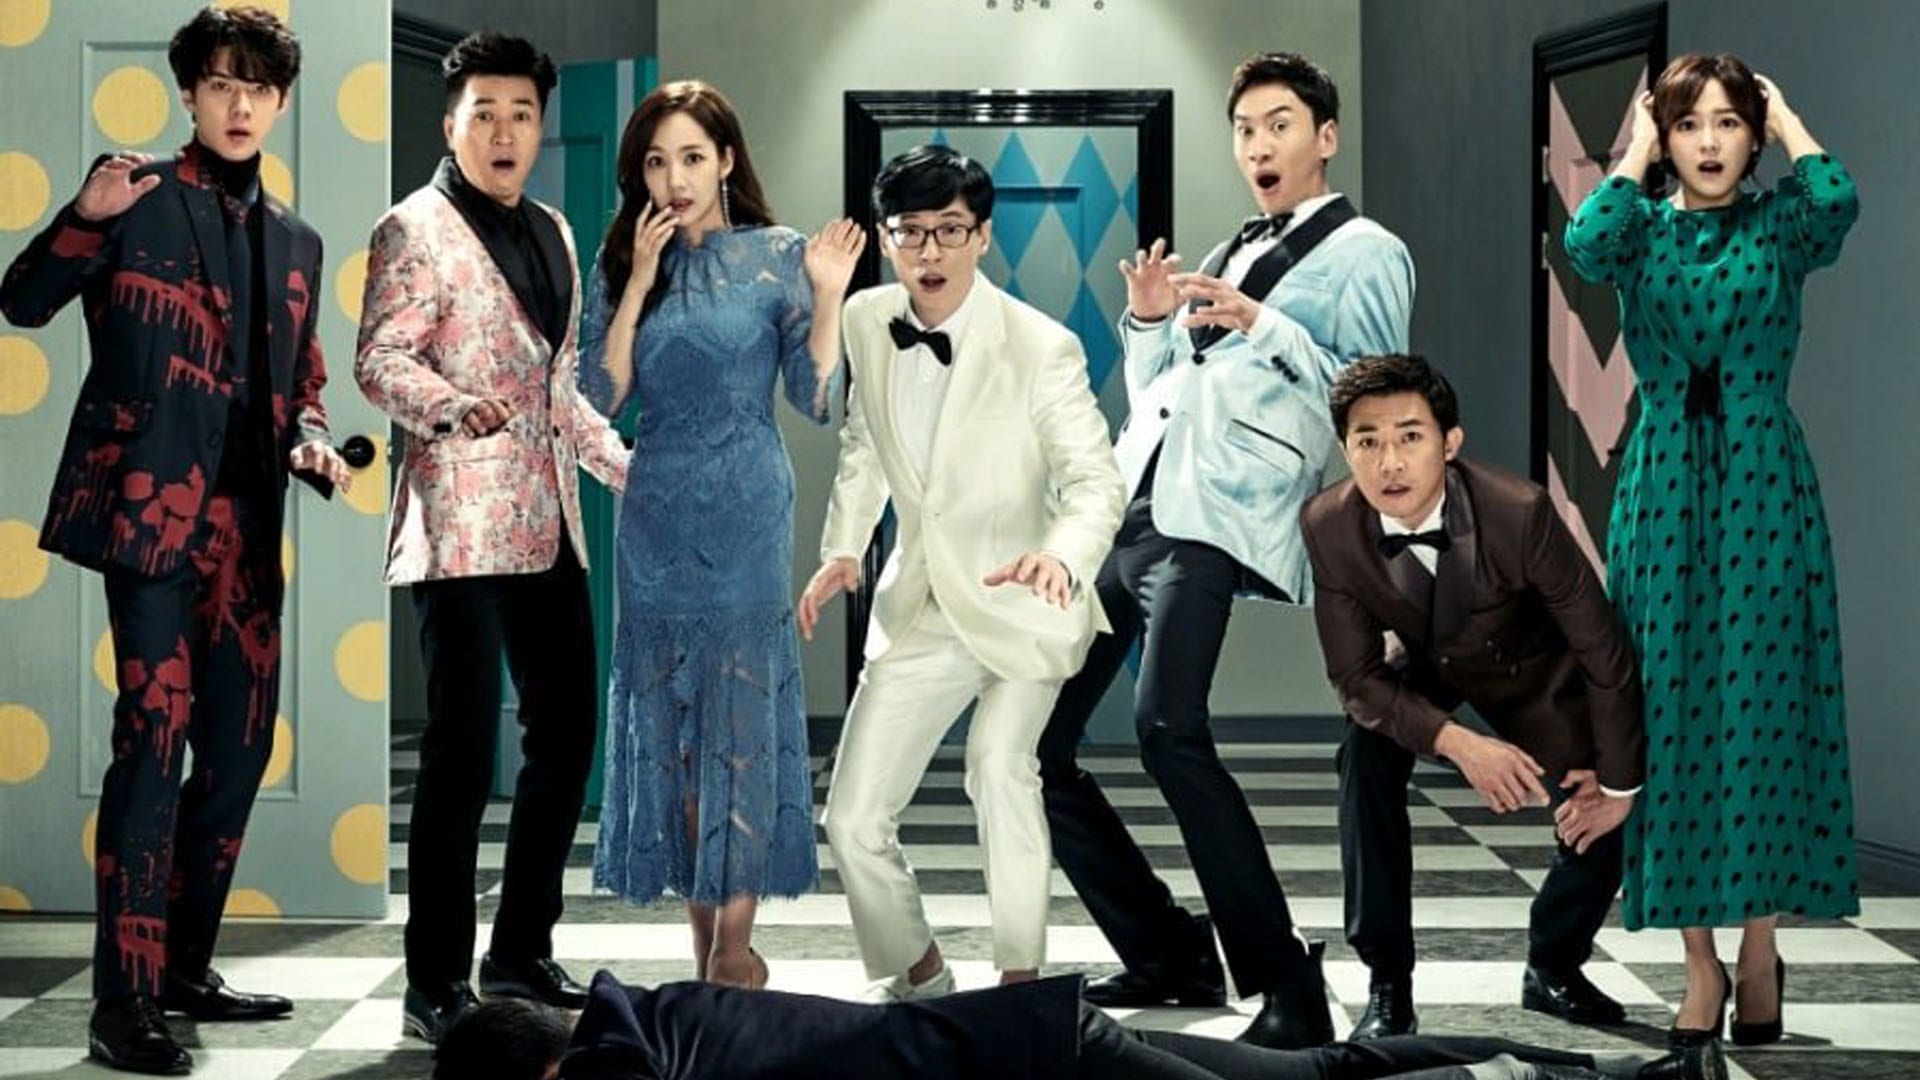 Busted! Season 2: Here's What We Know About The Korean Drama